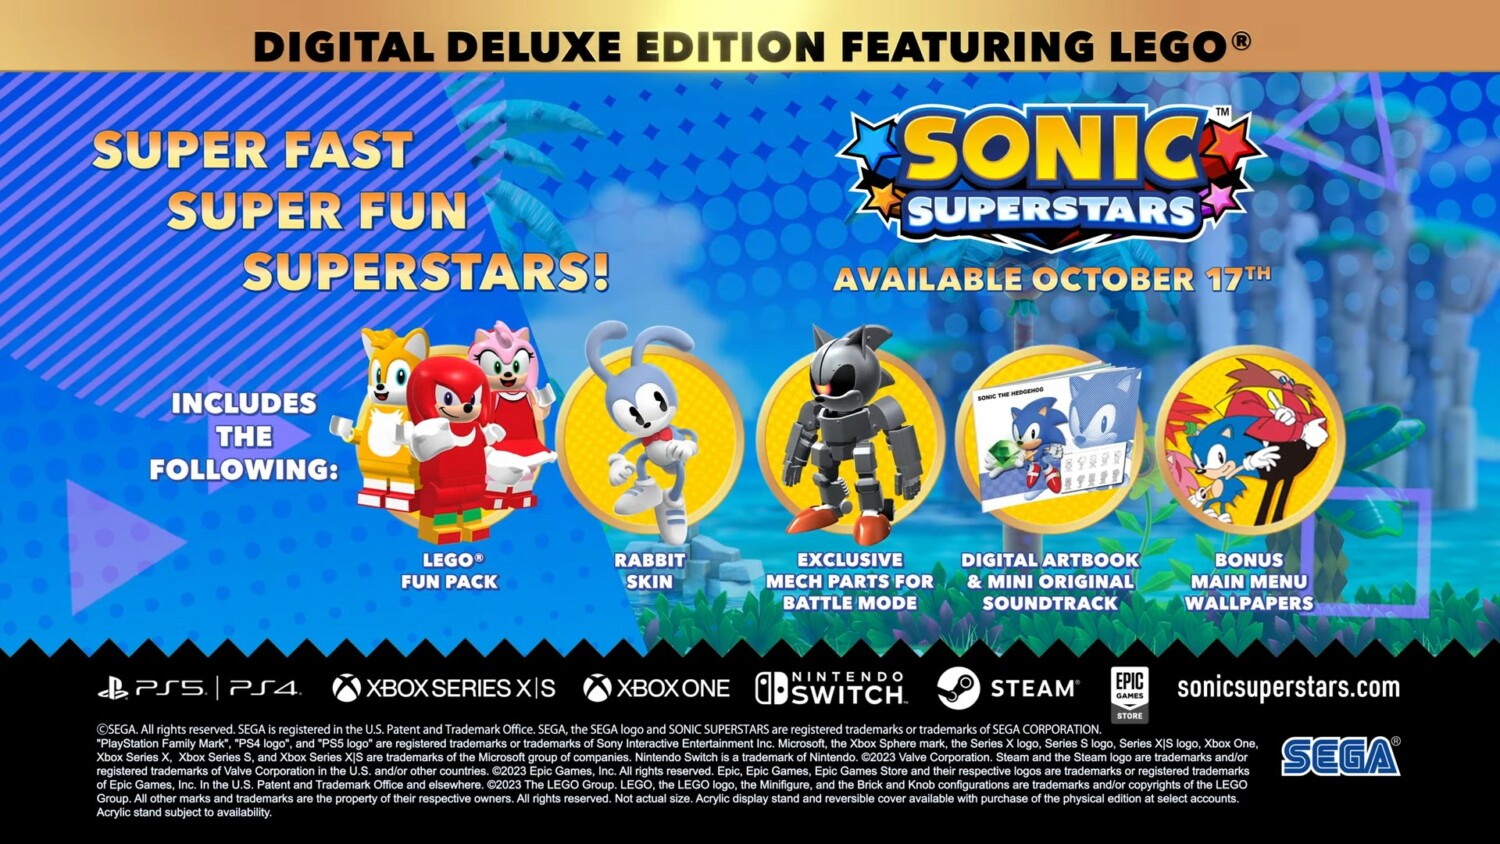 Sonic Frontiers the Final Horizon Deluxe Edition for (Instant Download) 